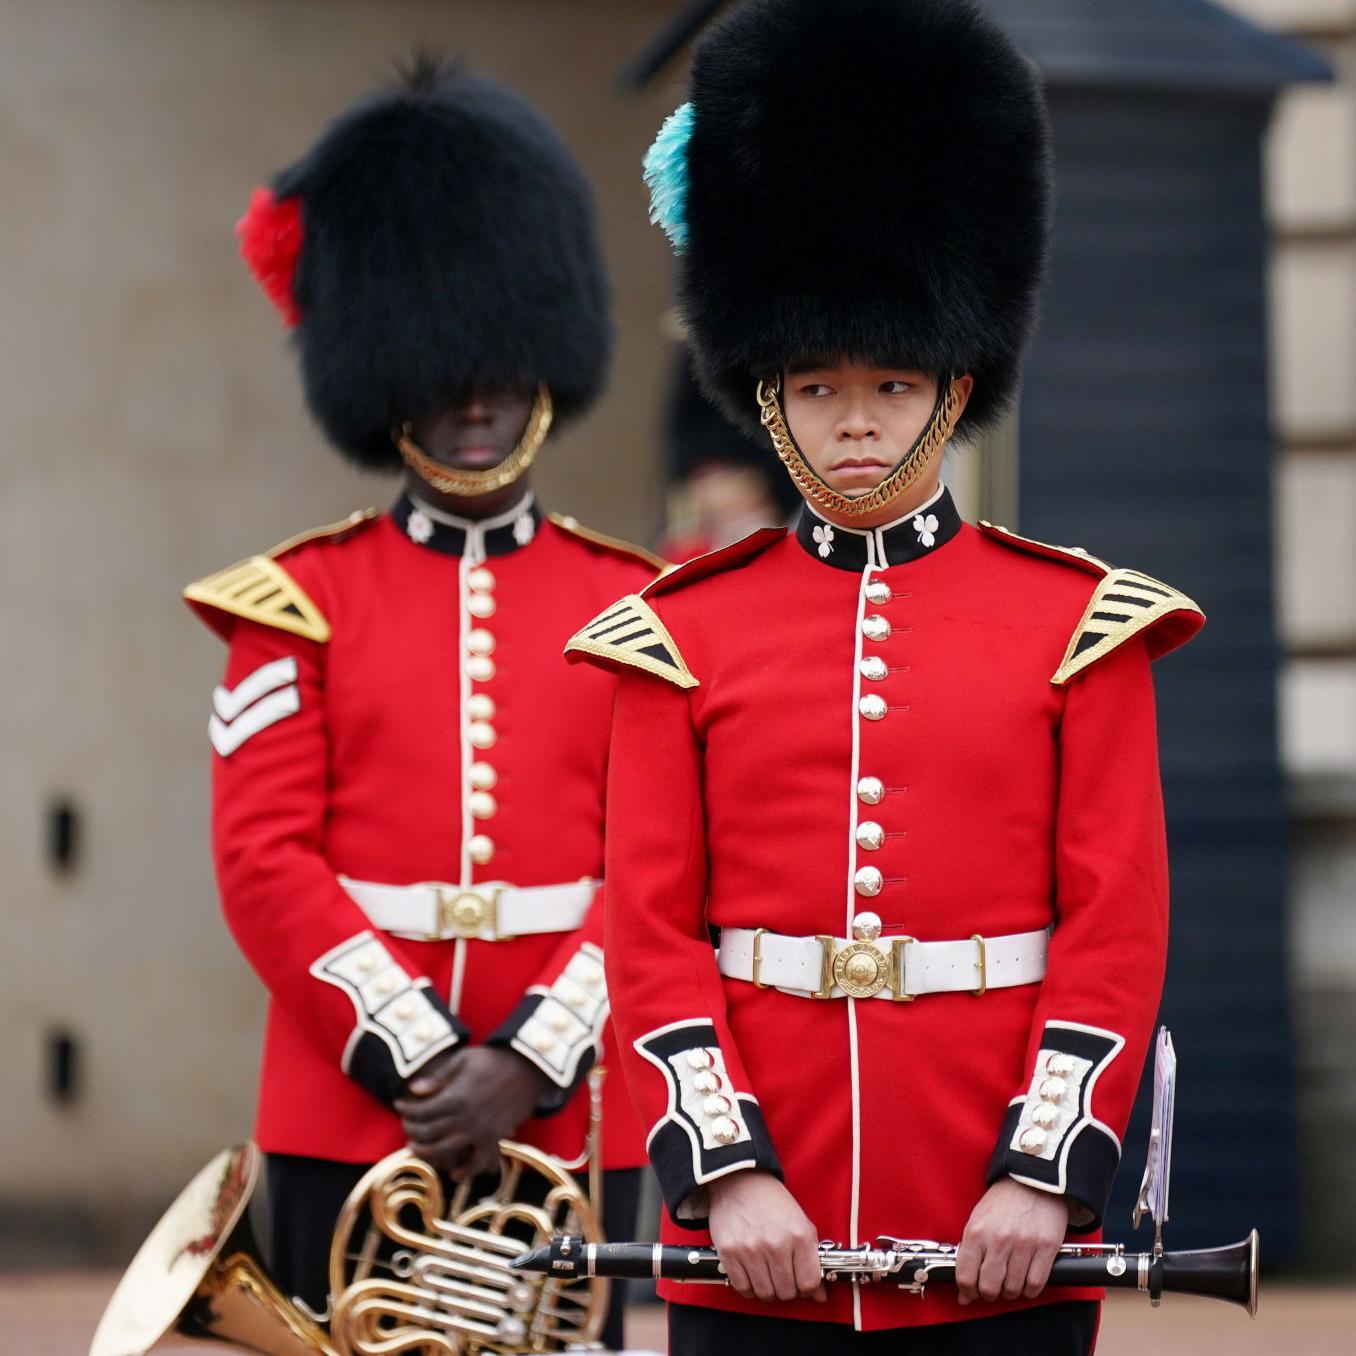 They're changing the guard again at Buckingham Palace after 18 months